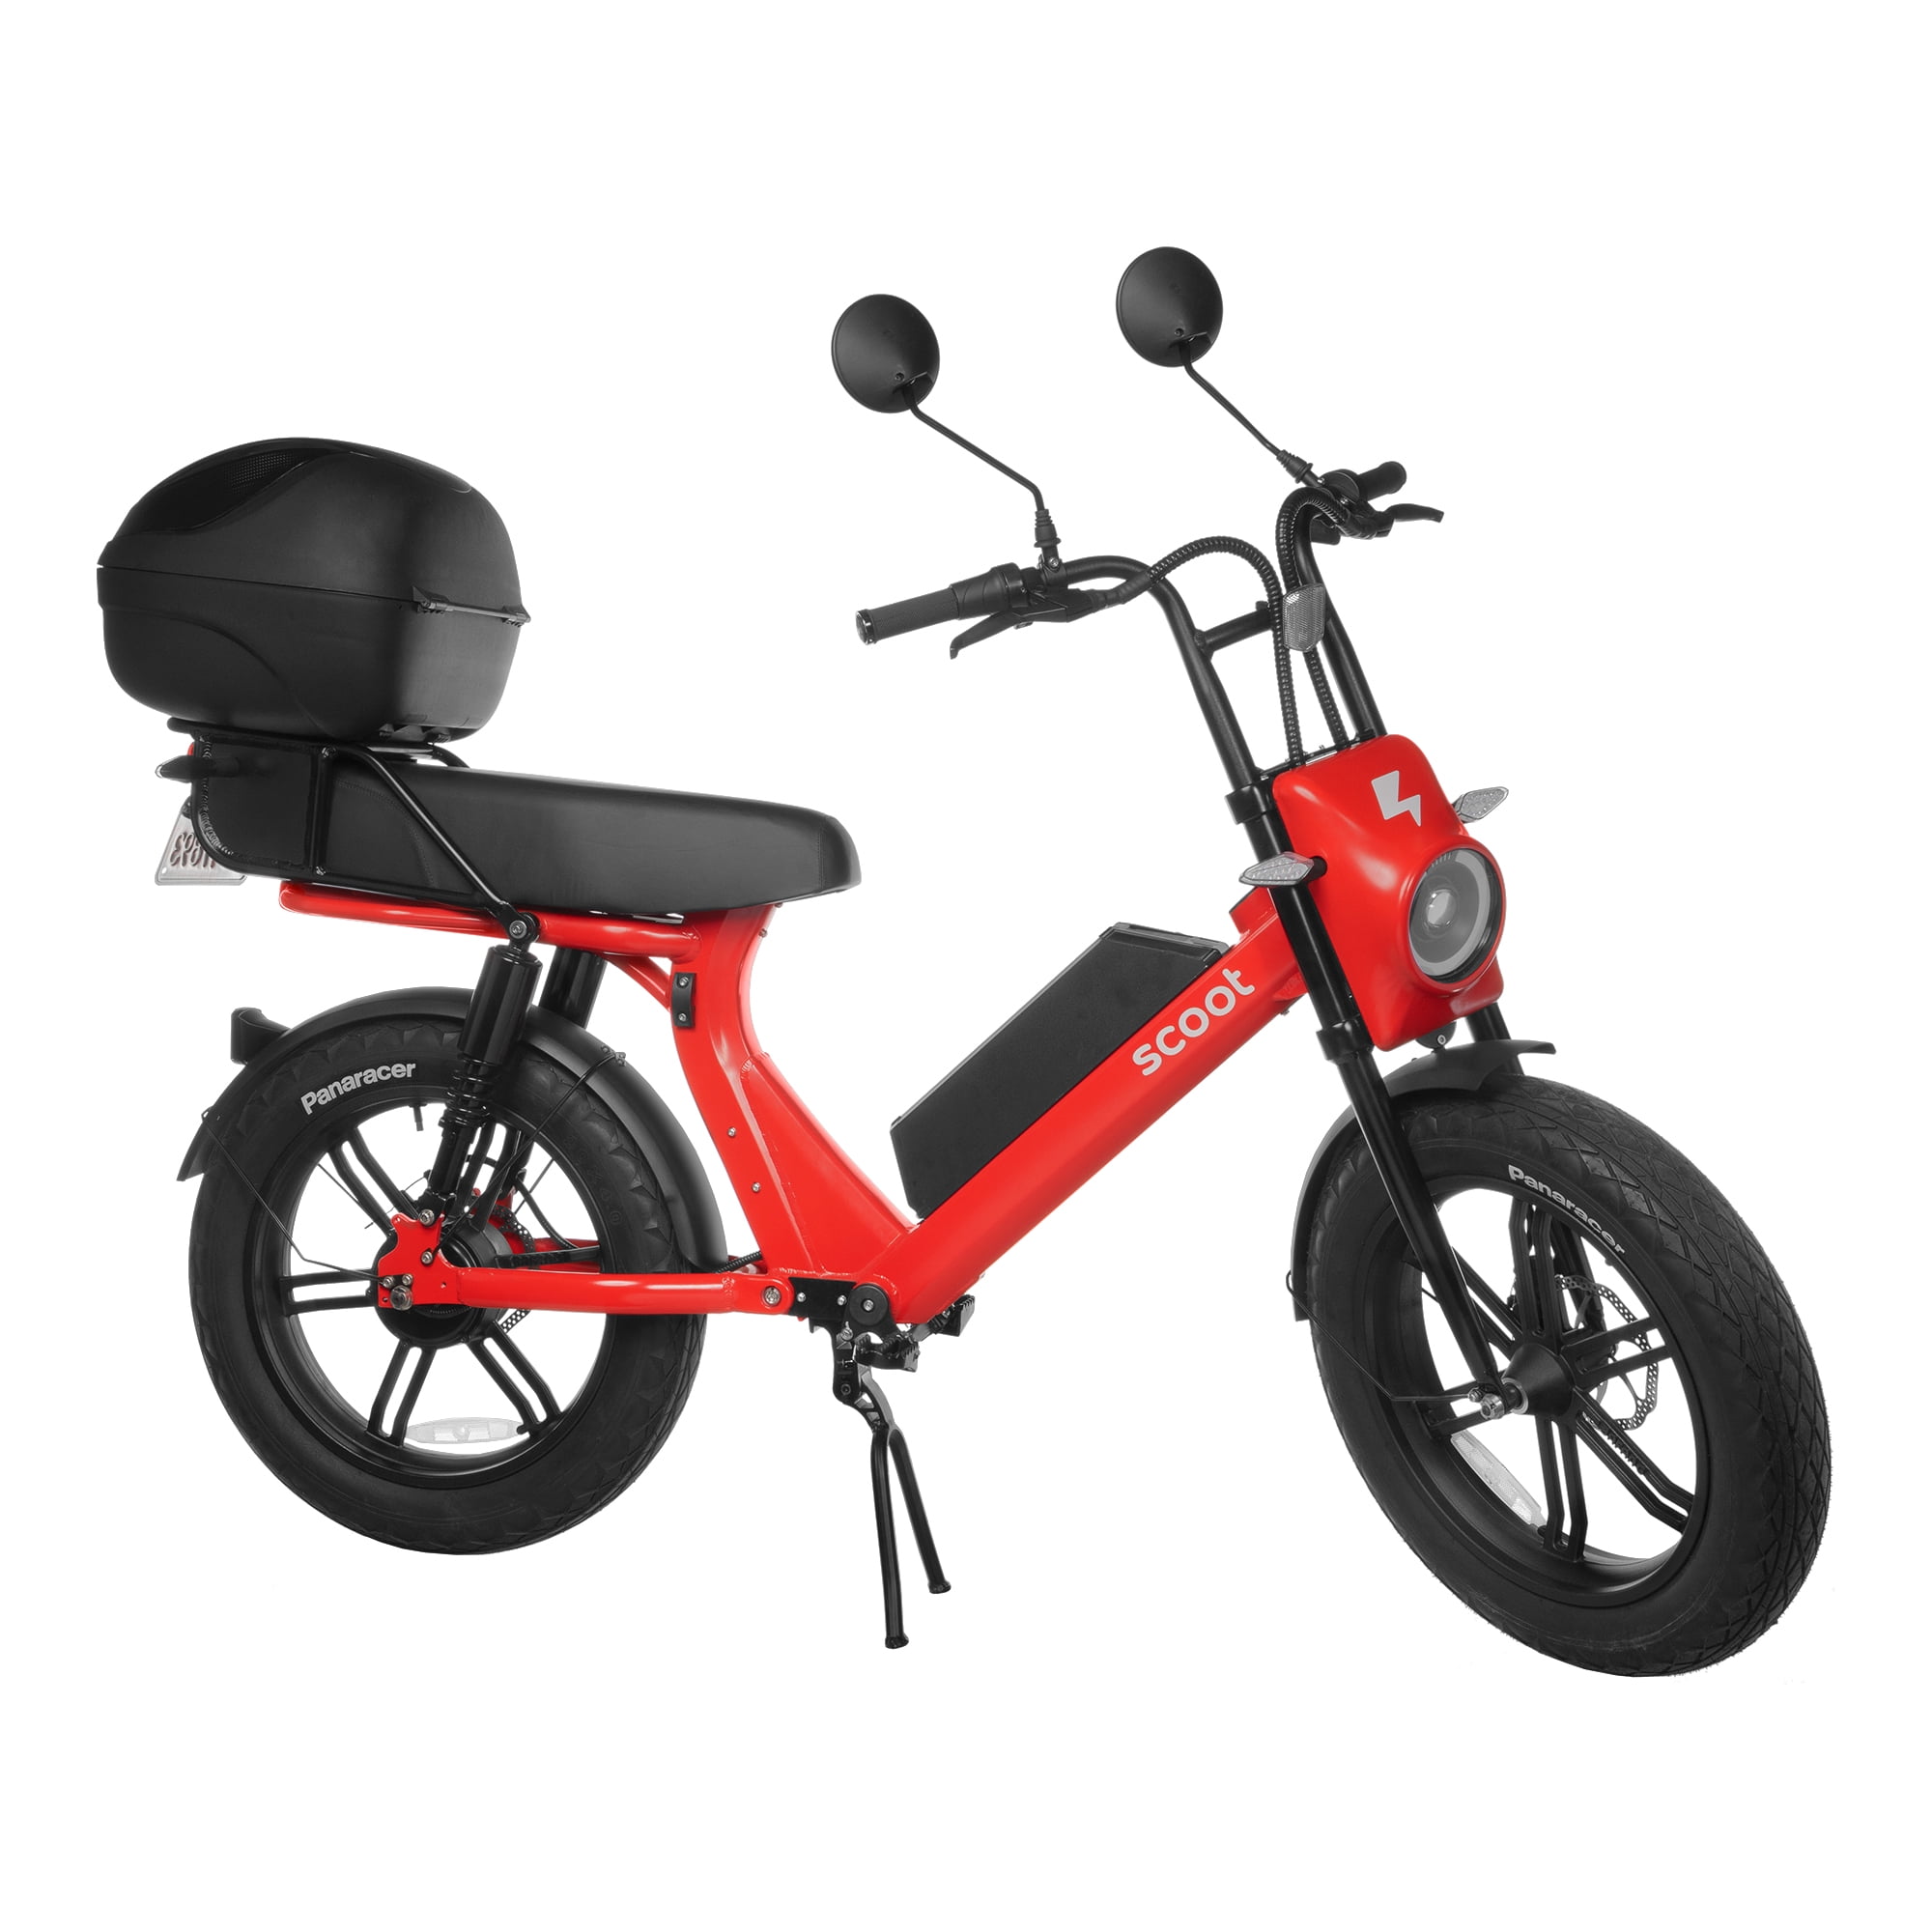 Bird Scoot Electric Scooter Bike | Seated, Moped-Style | 20 MPH, Twist Throttle | 750W Motor/ 52V Battery | LCD Red - Walmart.com